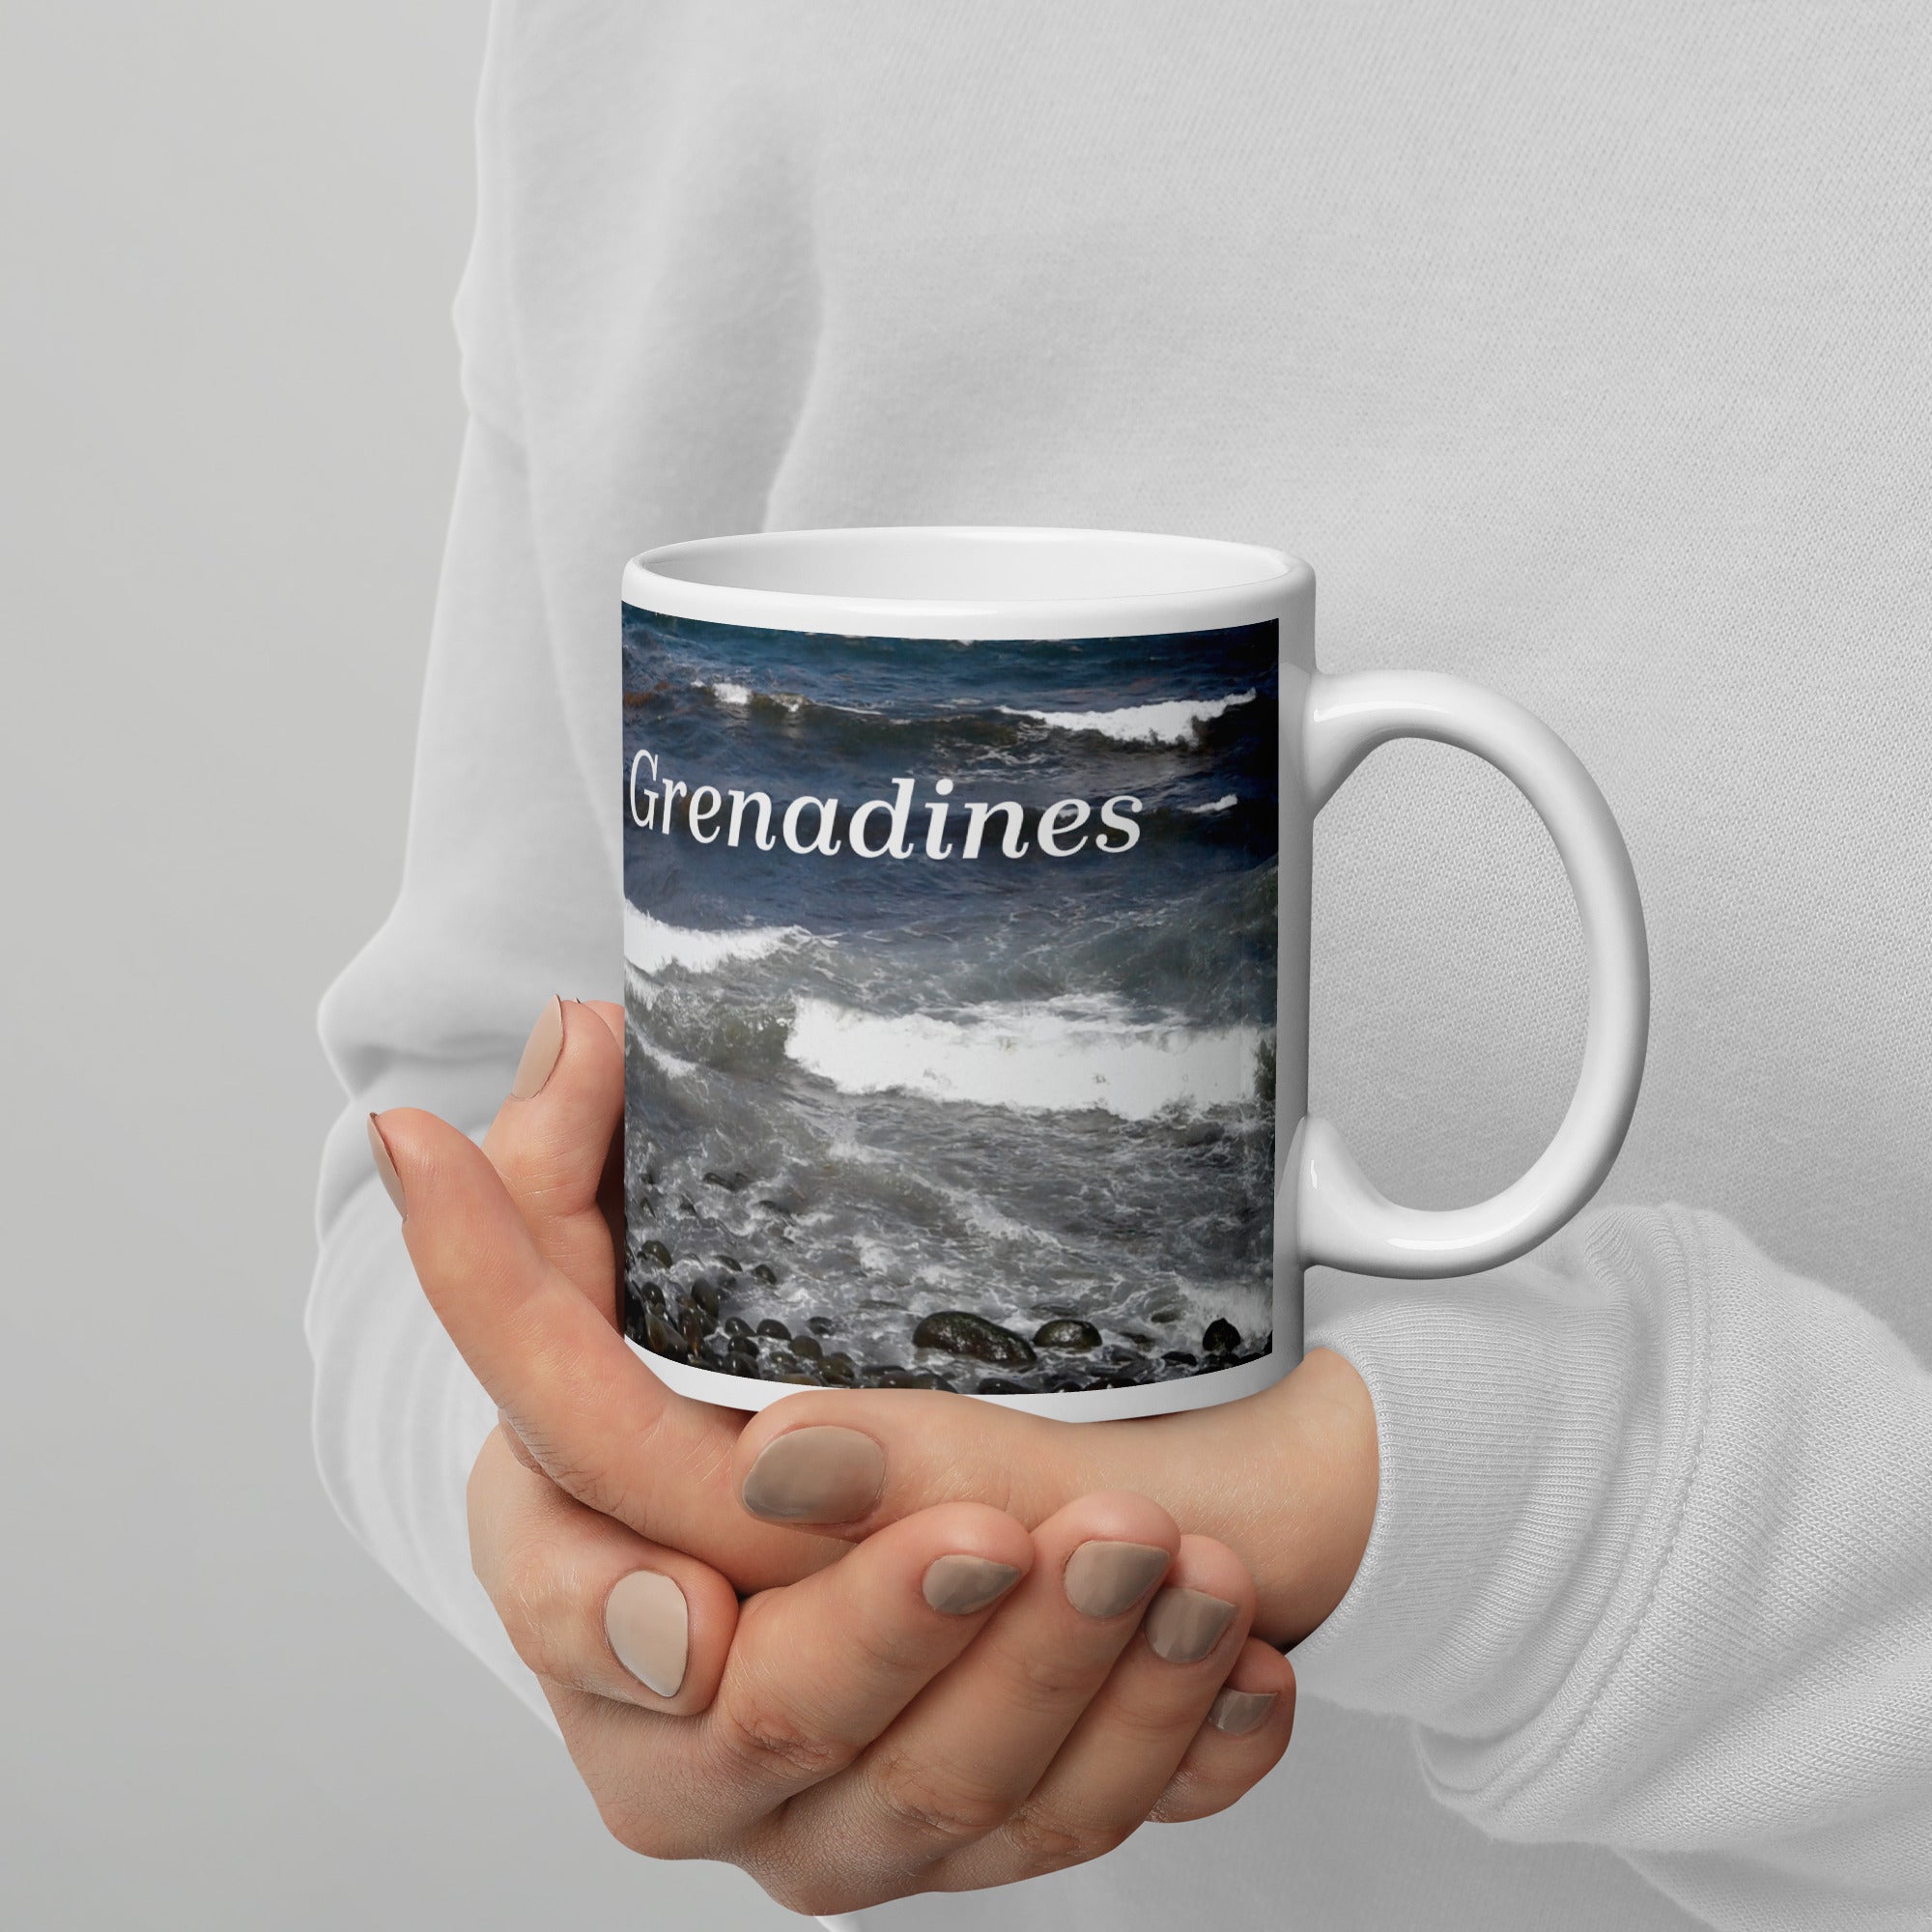 11oz ceramic mug featuring a photograph of one of the beaches on the windward side of the island of St. Vincent and the Grenadines